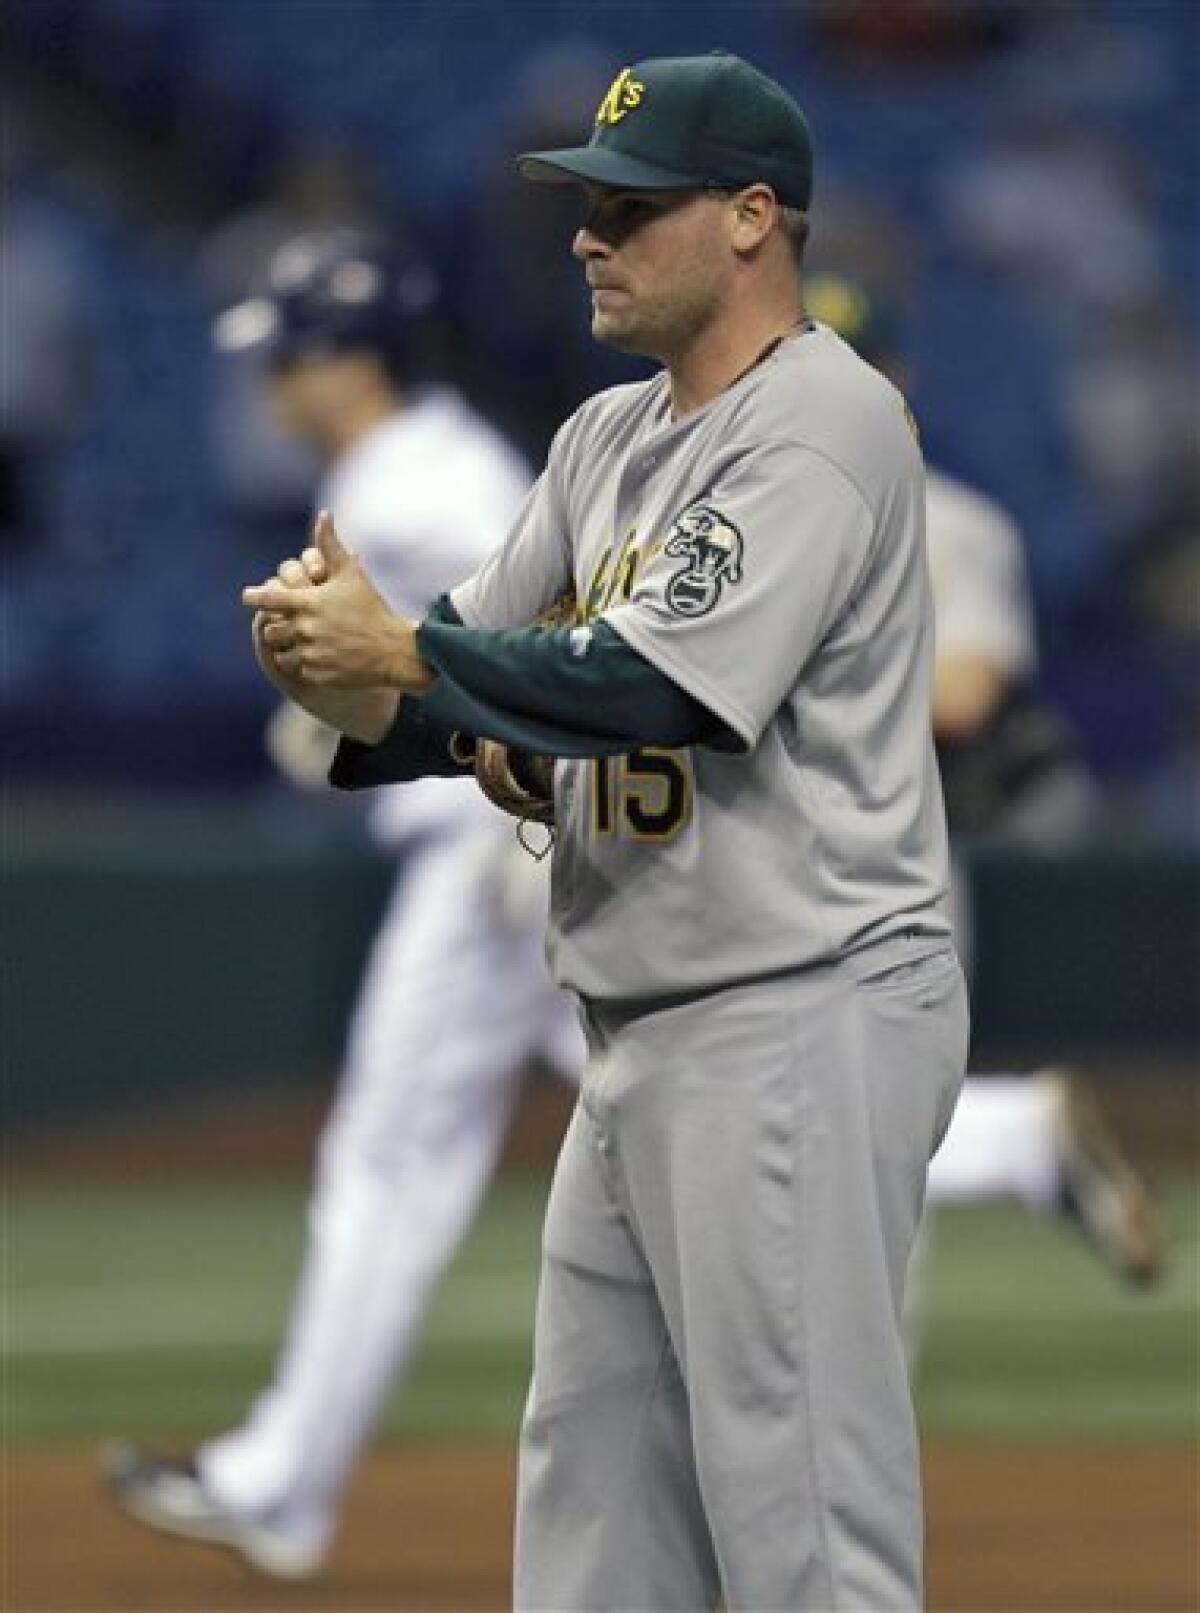 Rays beat A's for 12th win in 14 games - The San Diego Union-Tribune